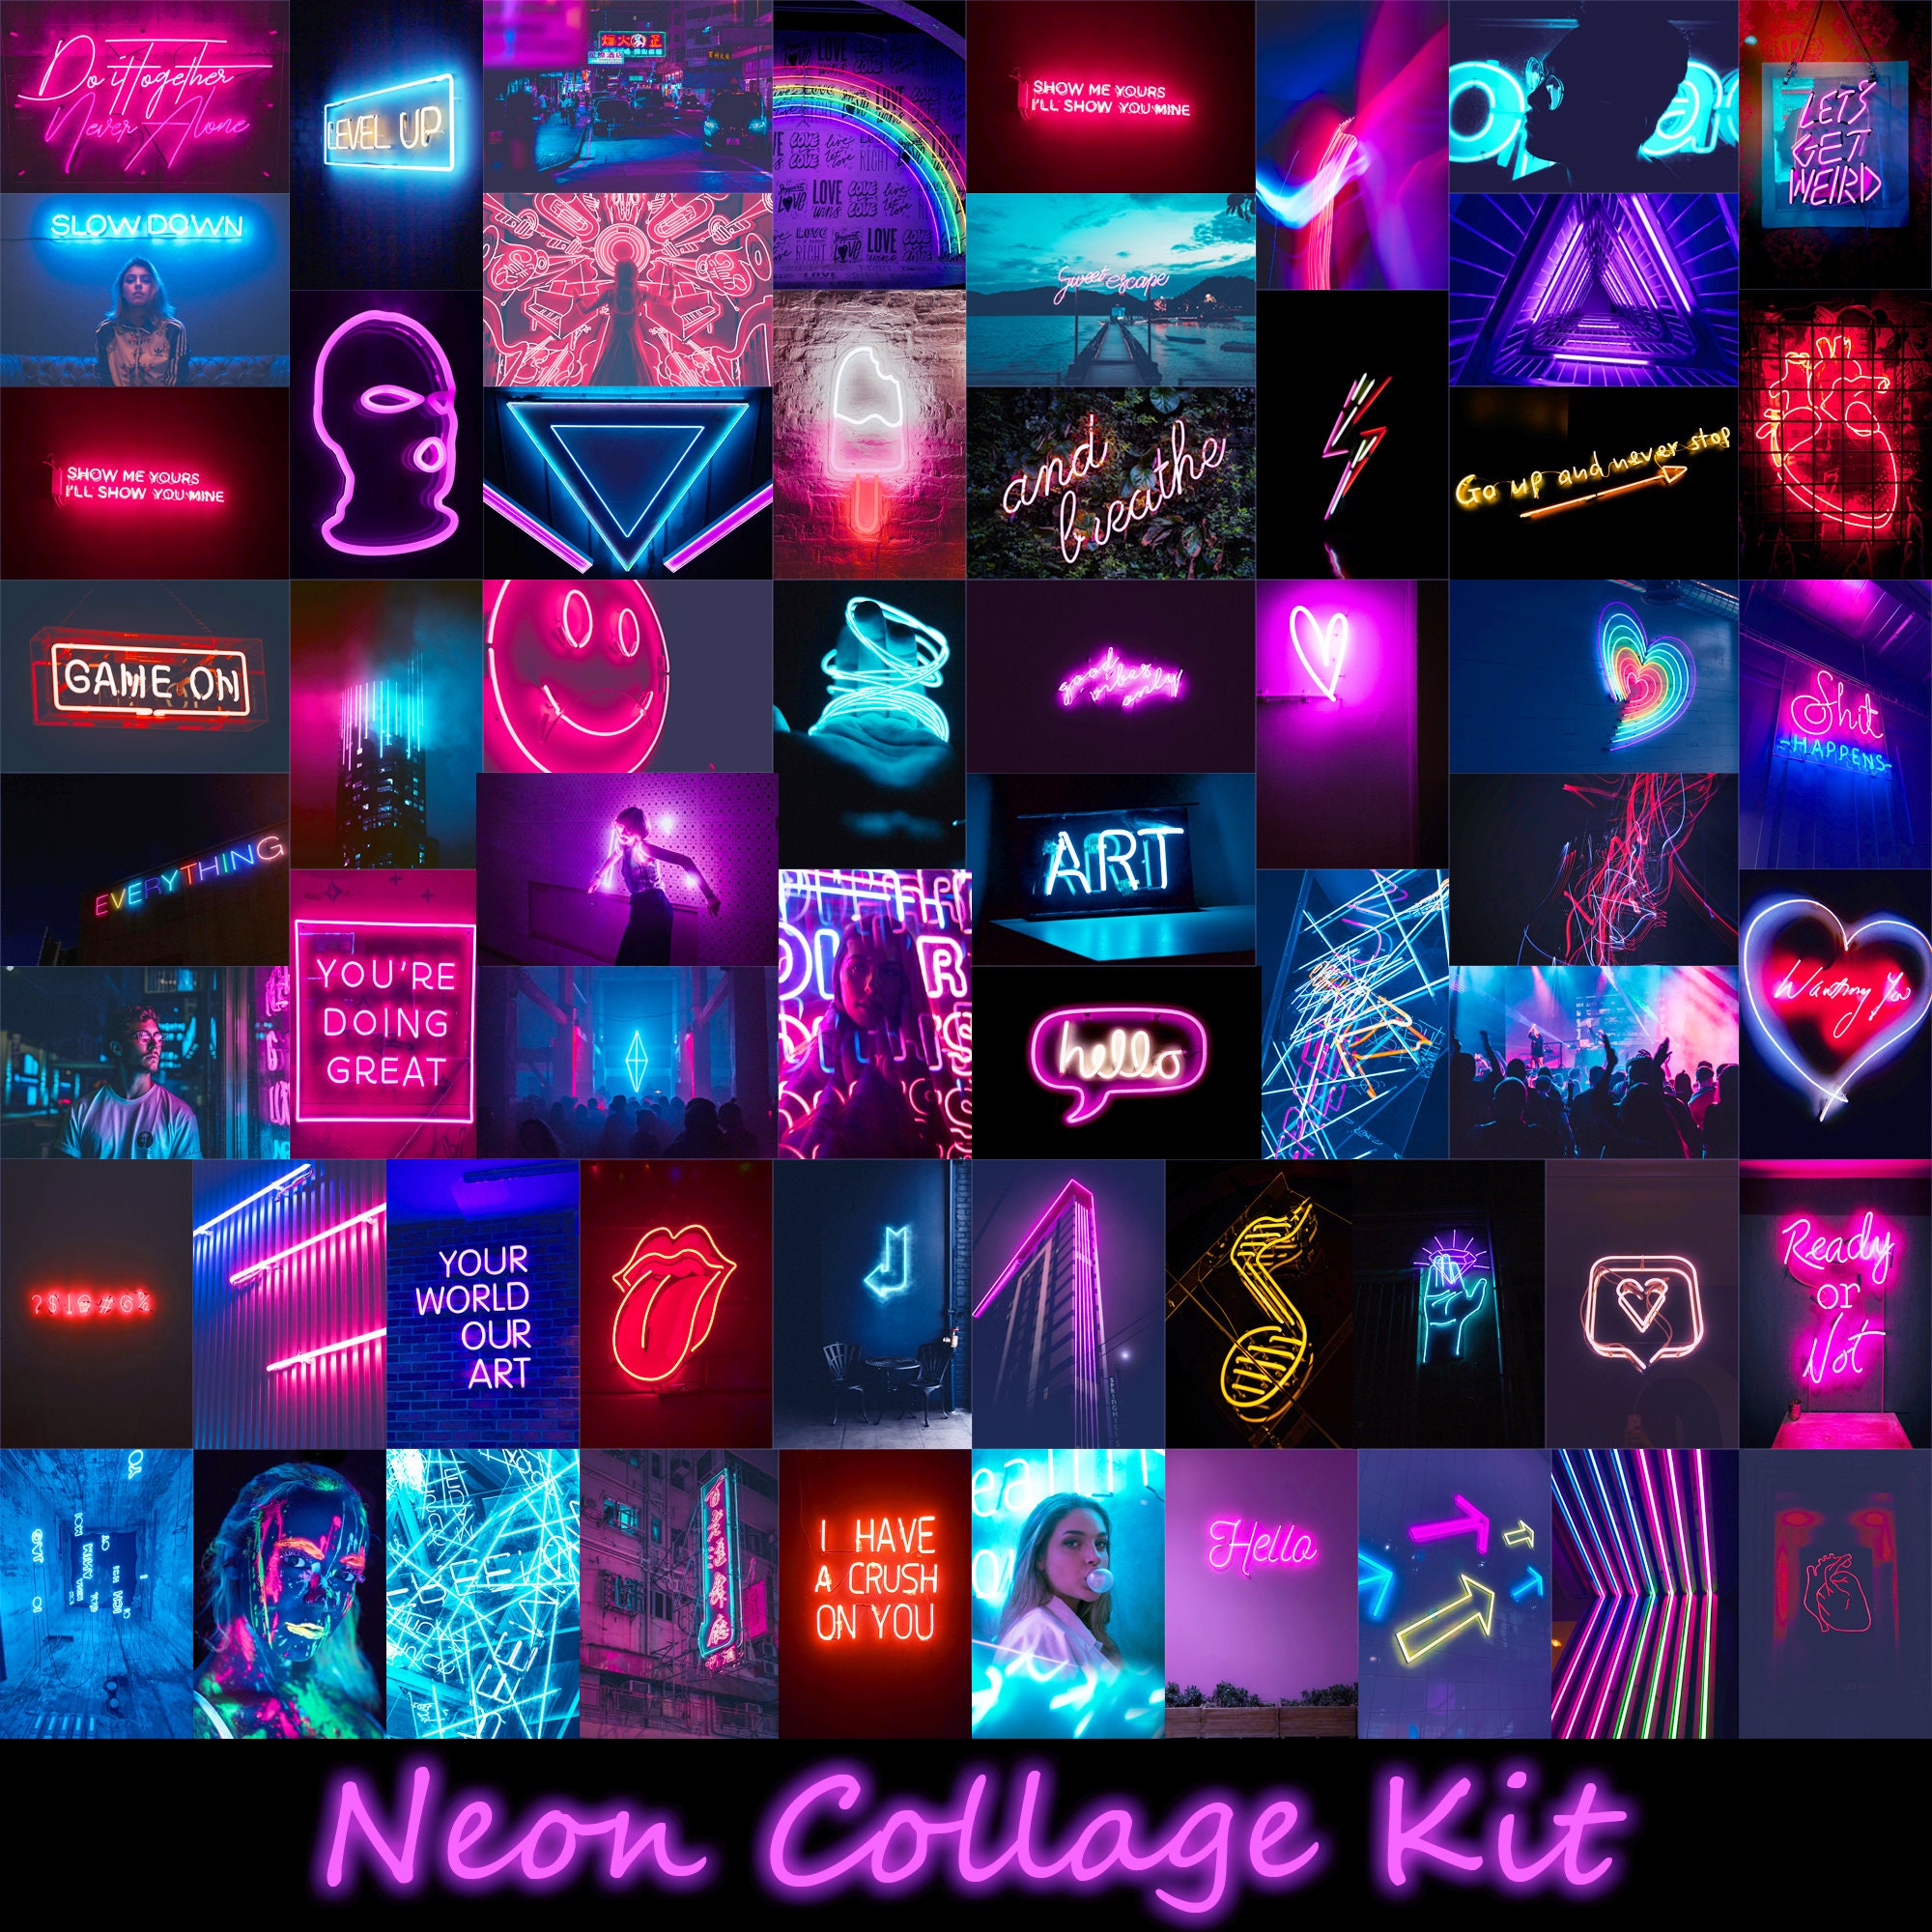 60 Neon wall collage kit Printed photo collage kit Aesthetic | Etsy